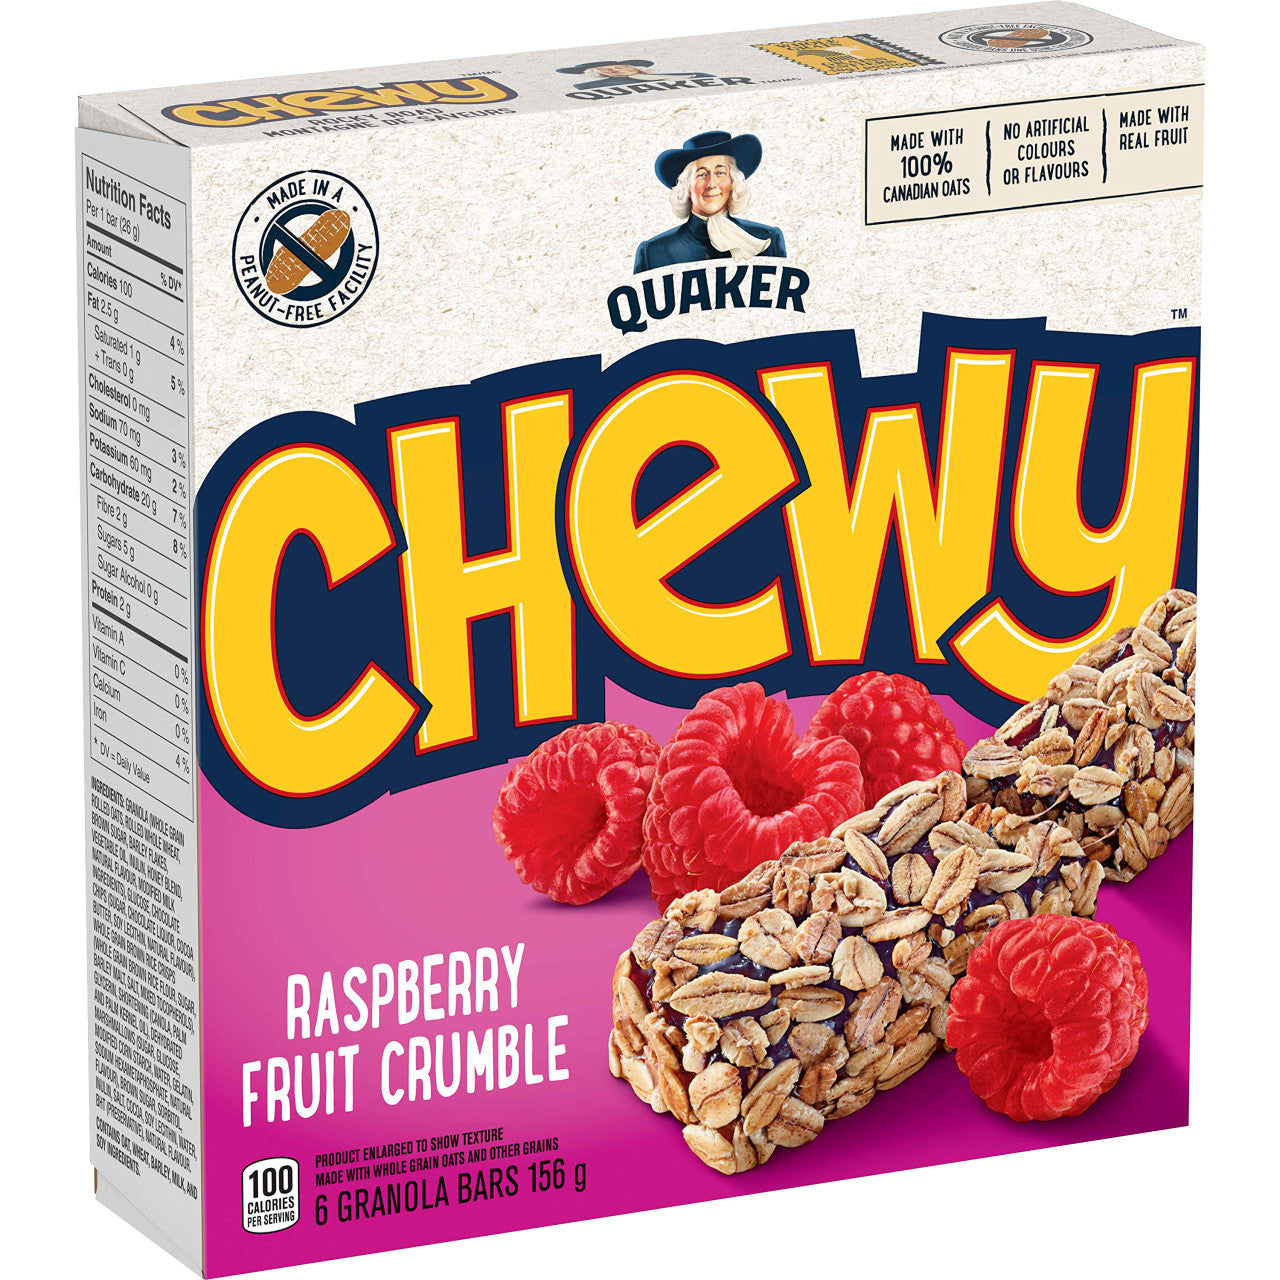 Quaker Chewy Raspberry Fruit Crumble, 156g/5.5oz/Box, 6 Bars Per Pack (Pack of 12) {Imported from Canada}